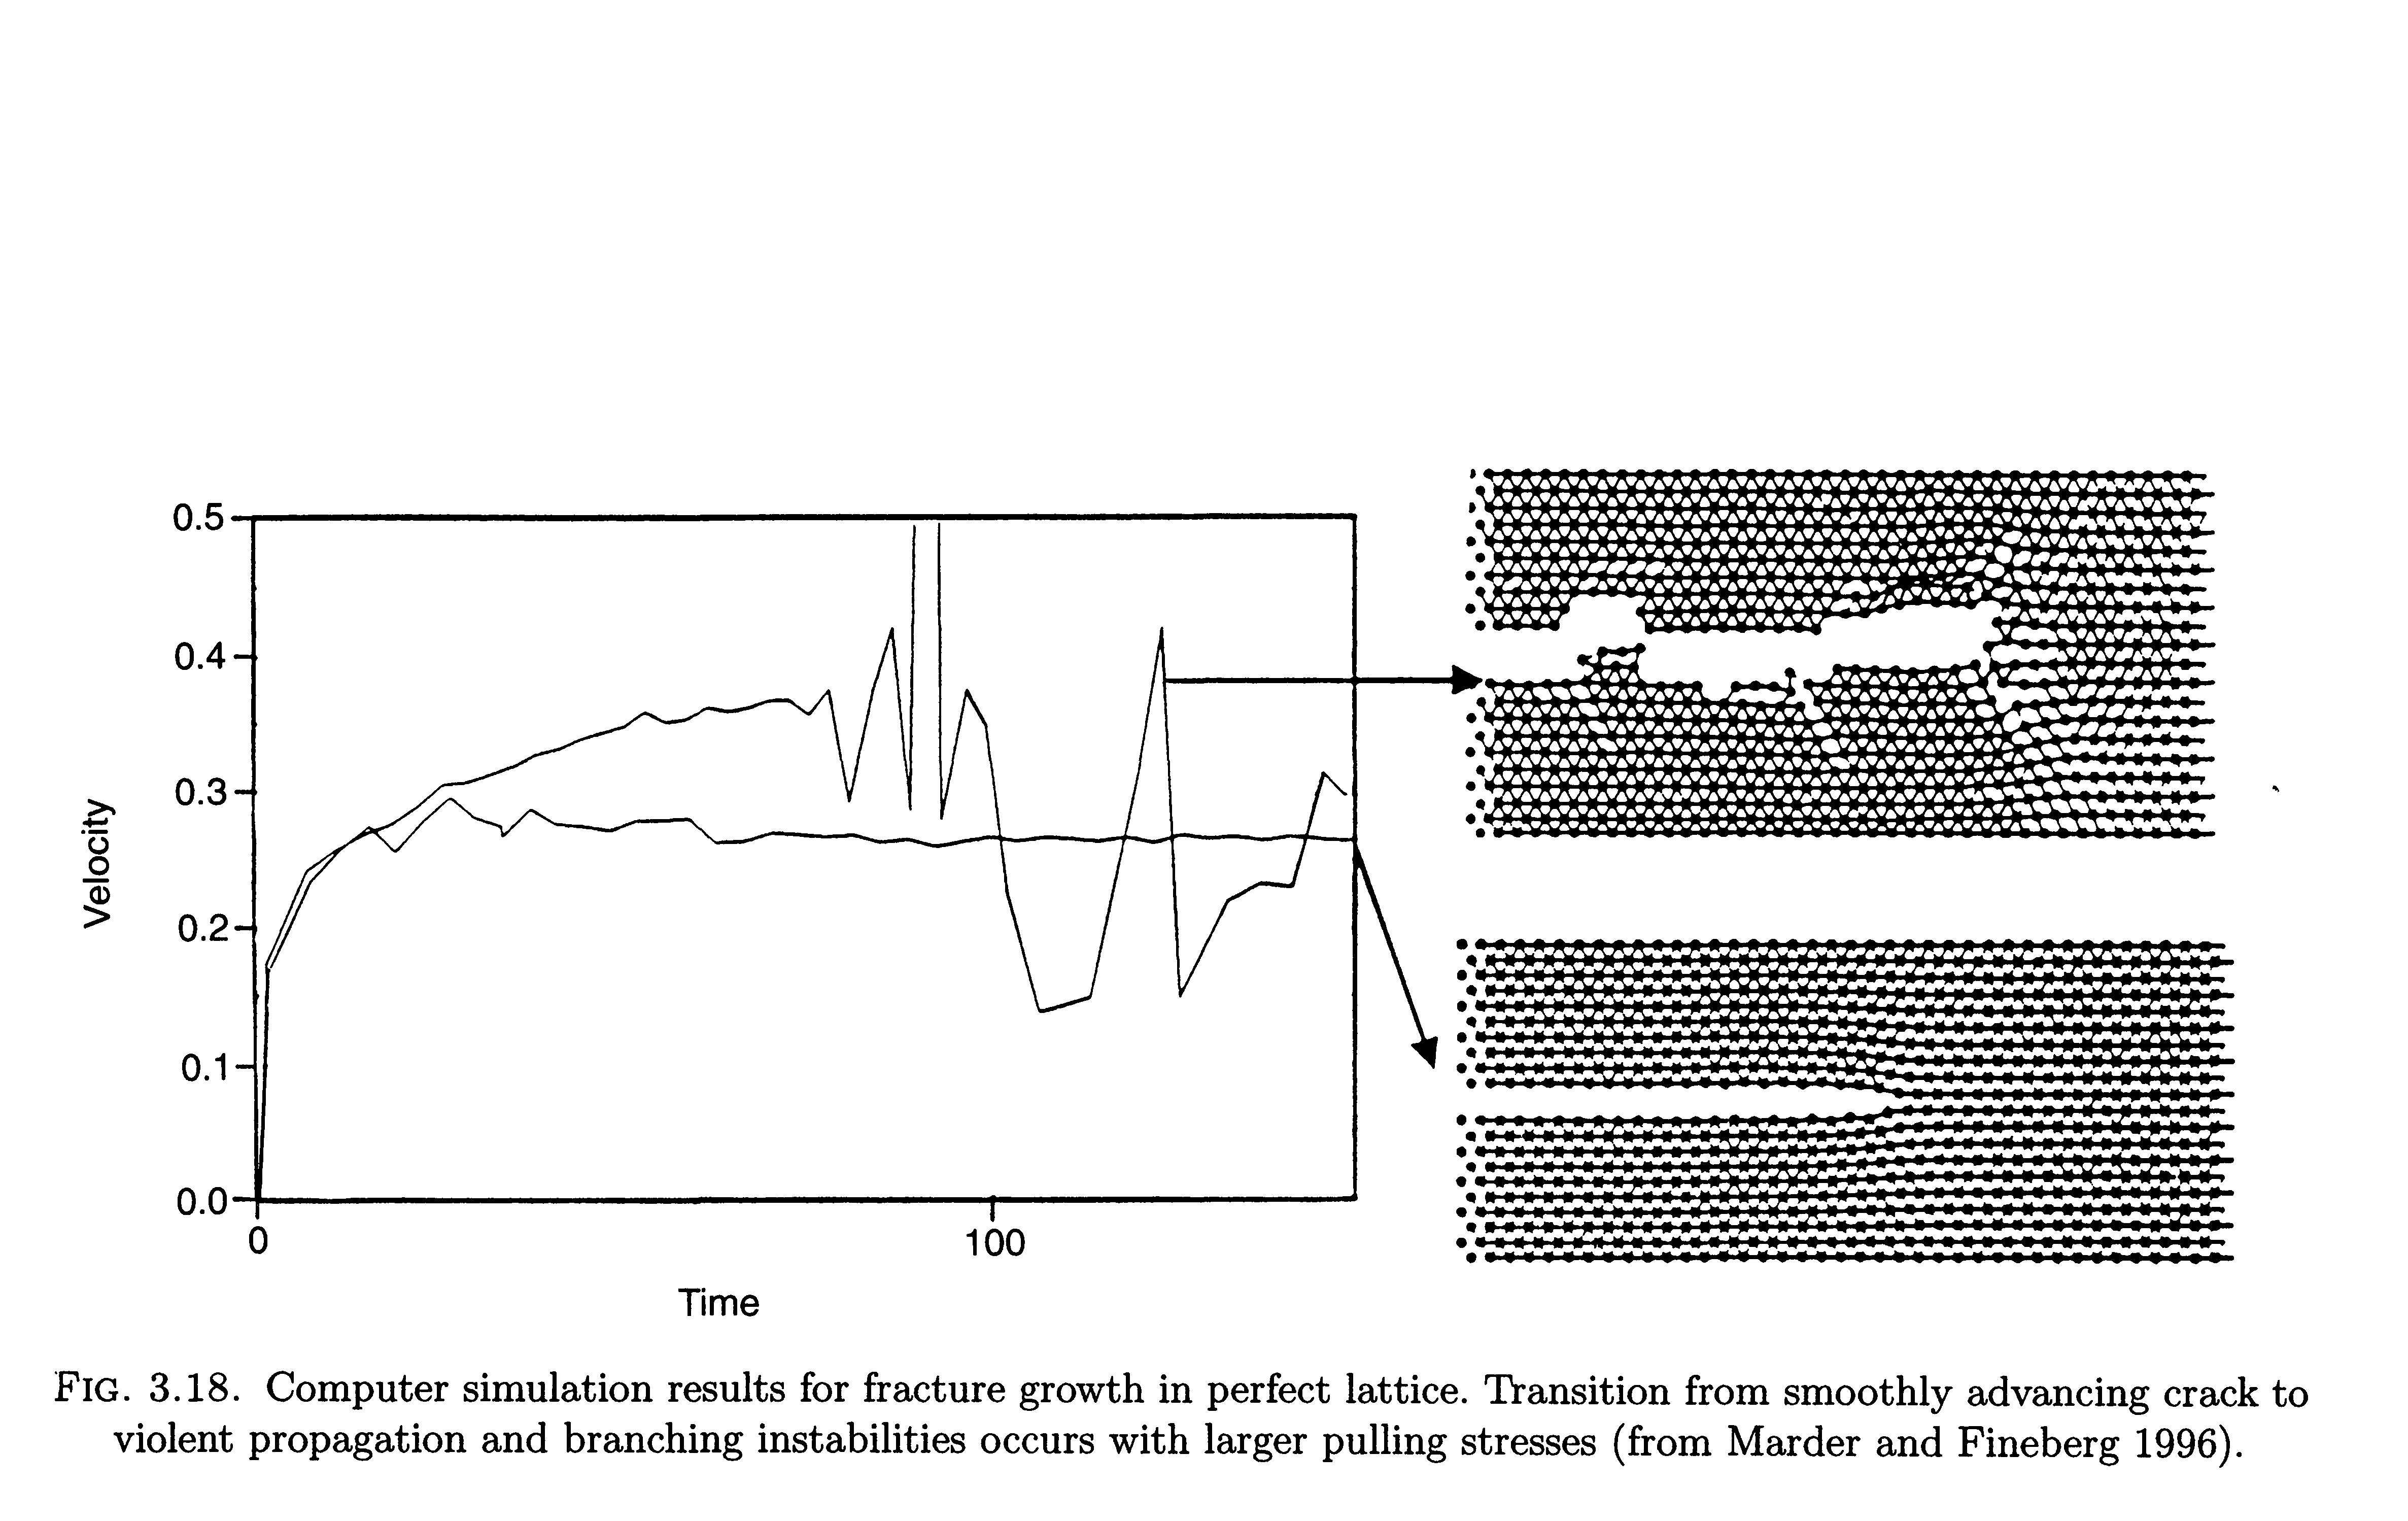 Fig. 3.18. Computer simulation results for fracture growth in perfect lattice. Transition from smoothly advancing crack to violent propagation and branching instabilities occurs with larger pulling stresses (from Marder and Fineberg 1996).